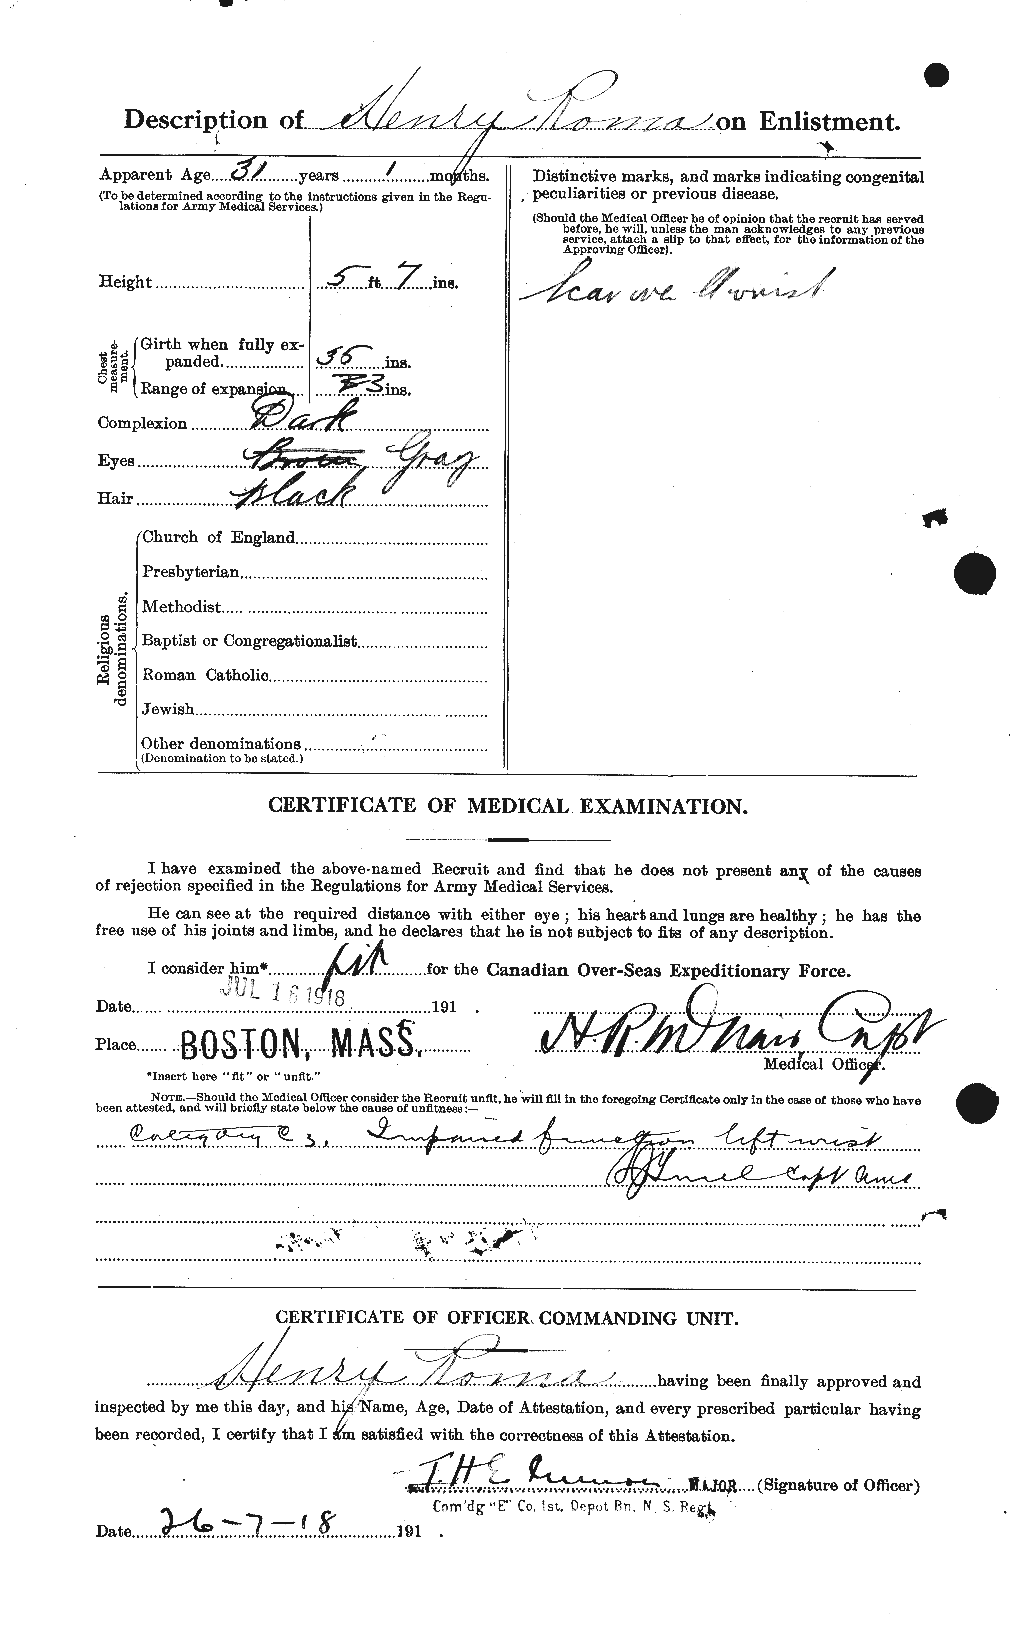 Personnel Records of the First World War - CEF 613515b